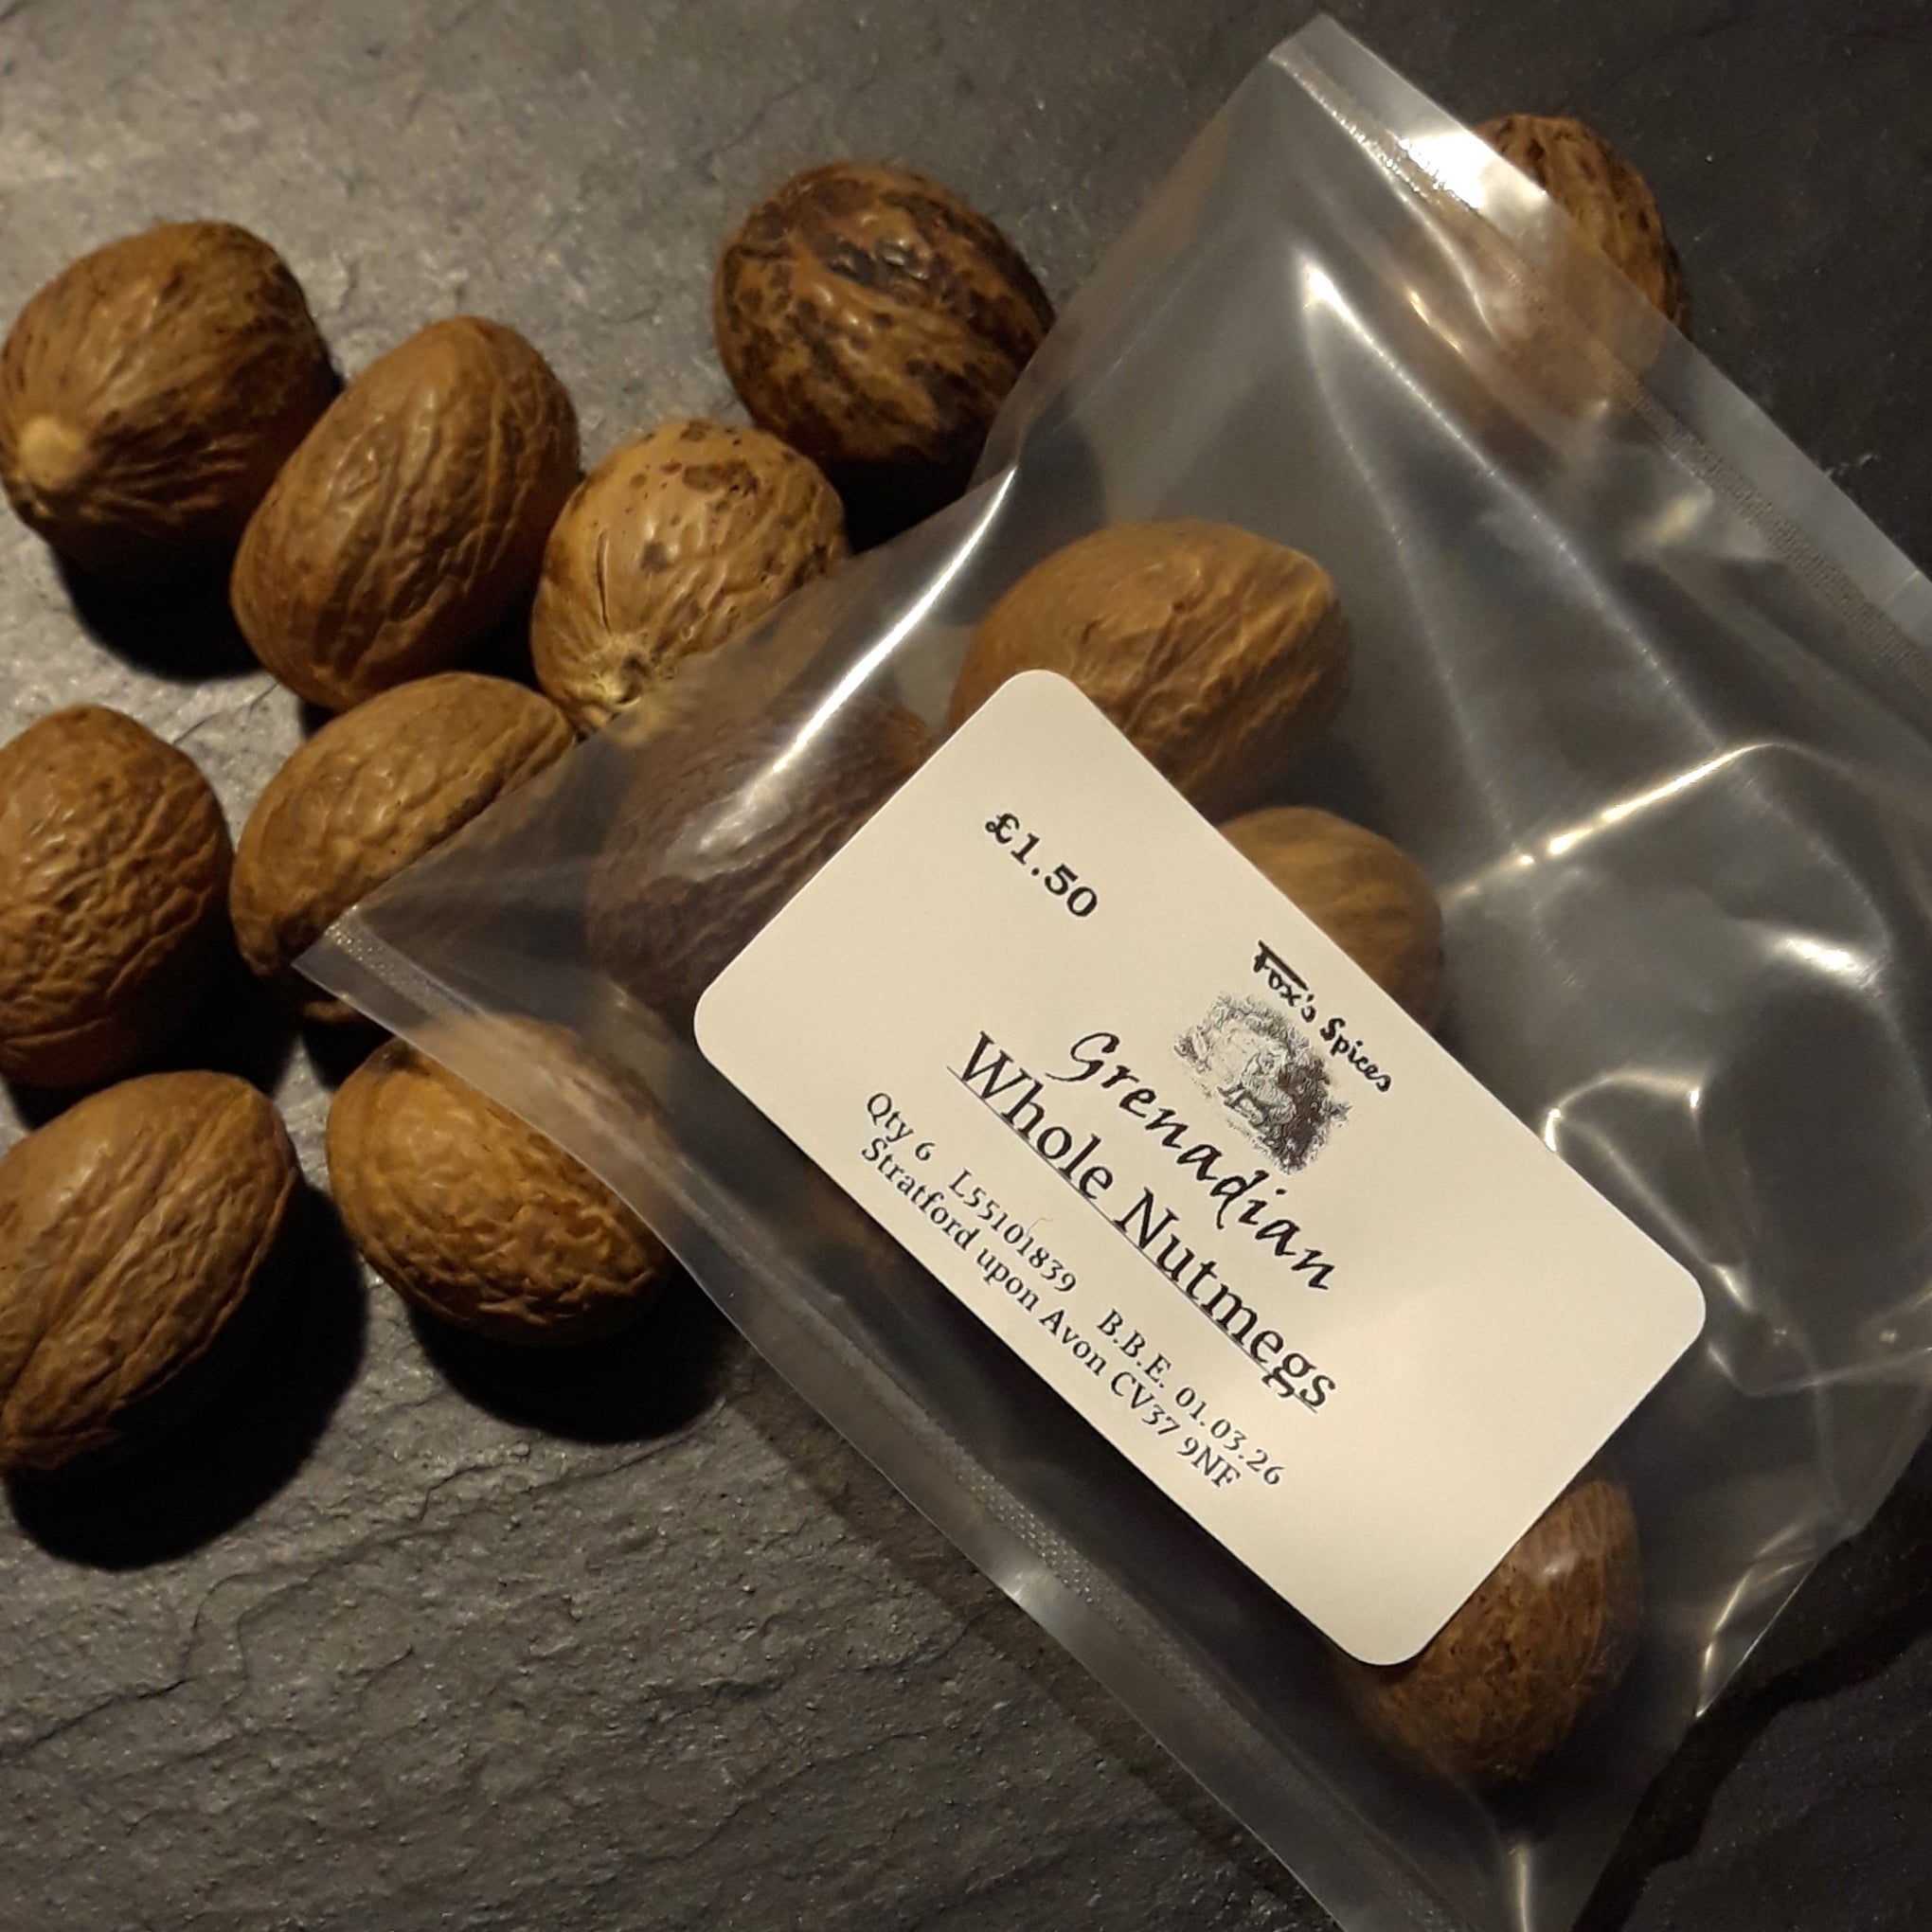 6 whole nutmegs in a bag from Fox's Spices.